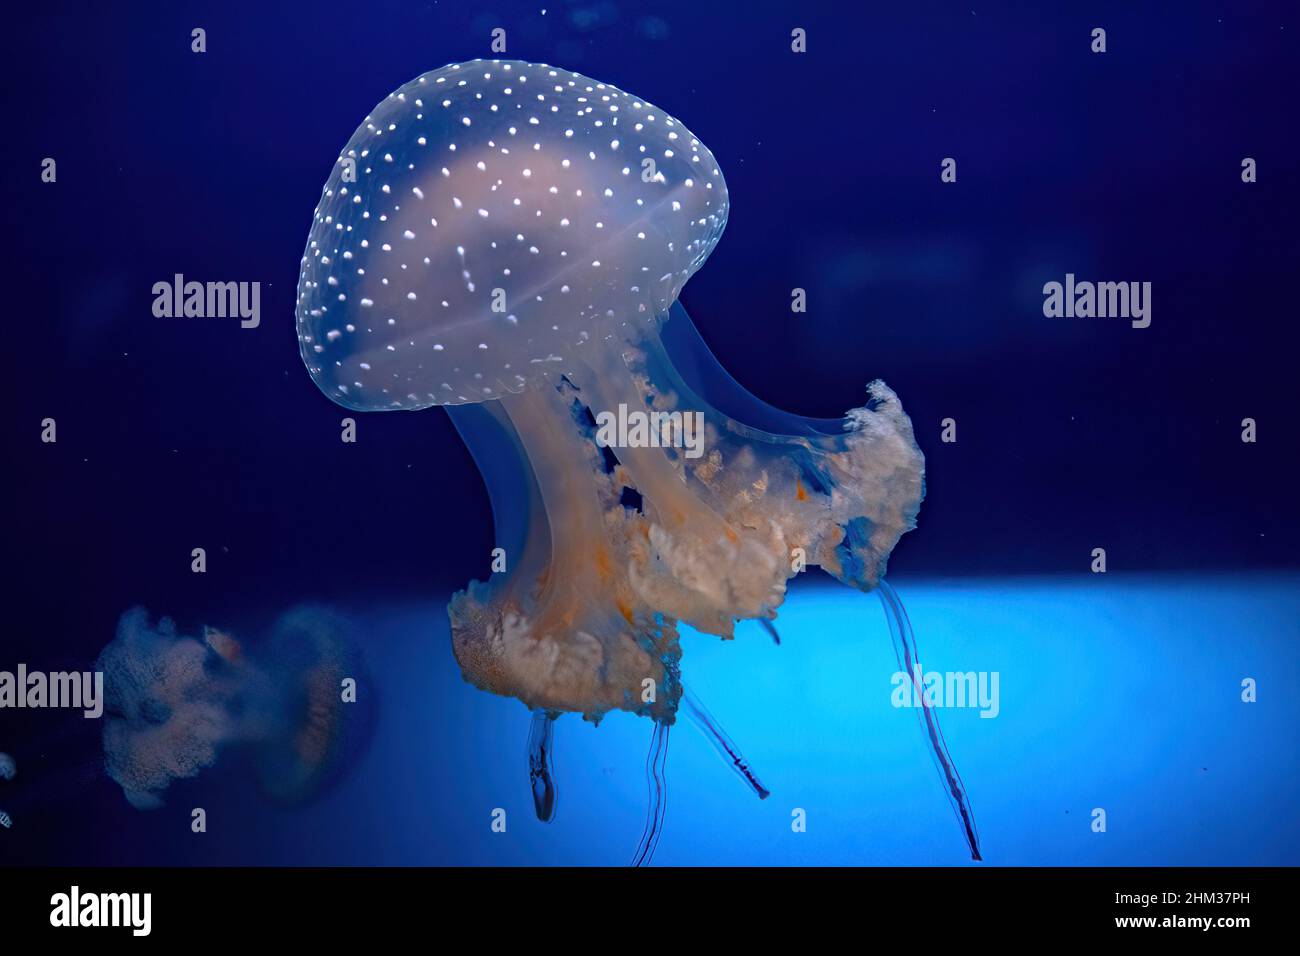 Australian spotted Jellyfish of aquarium floating in the water. Phyllorhiza punctata species living in tropical waters of the western Pacific from Stock Photo